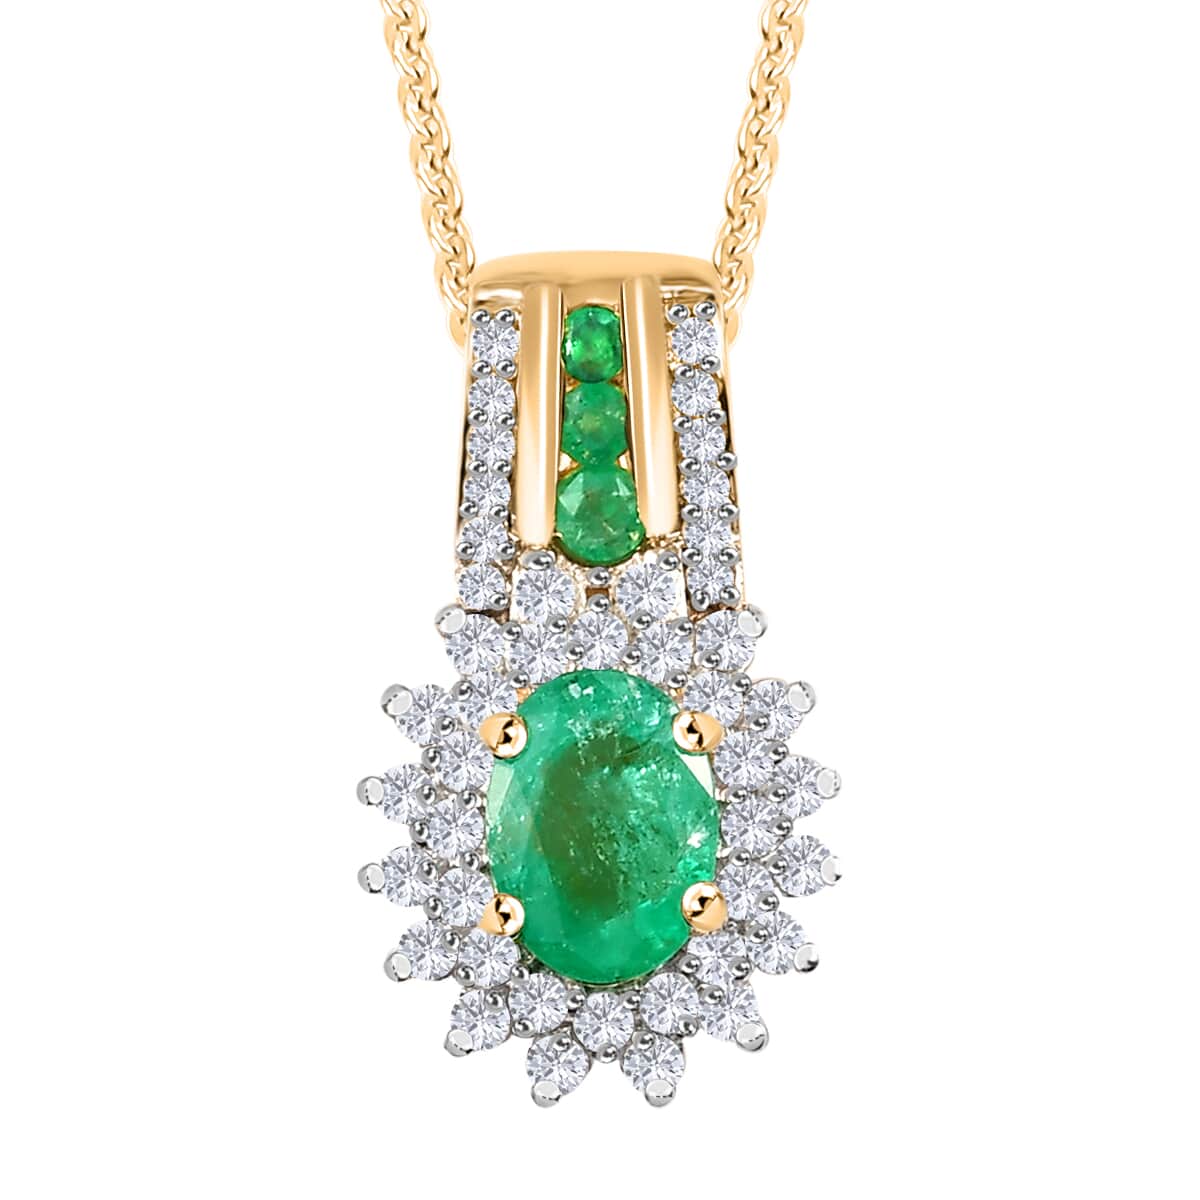 AAA Kagem Zambian Emerald White Zircon Necklace in Vermeil Yellow Gold Plated Sterling Silver,Silver Sunburst Necklace,Oval Halo Pendant 1.35 ctw (20 Inches) image number 0